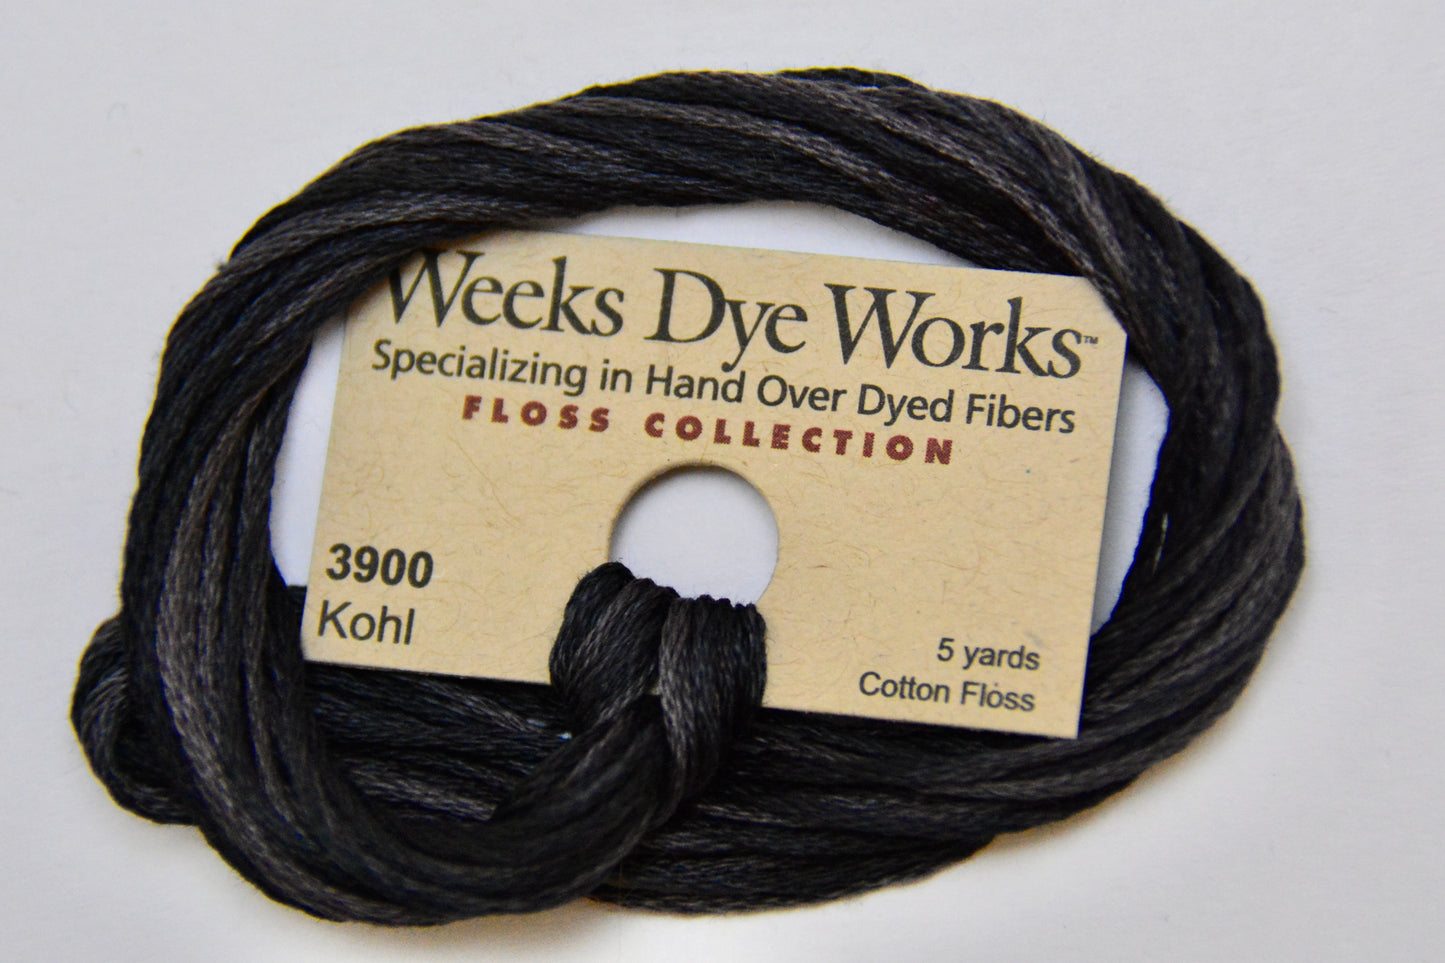 Kohl 3900 Weeks Dye Works 6-Strand Hand-Dyed Embroidery Floss